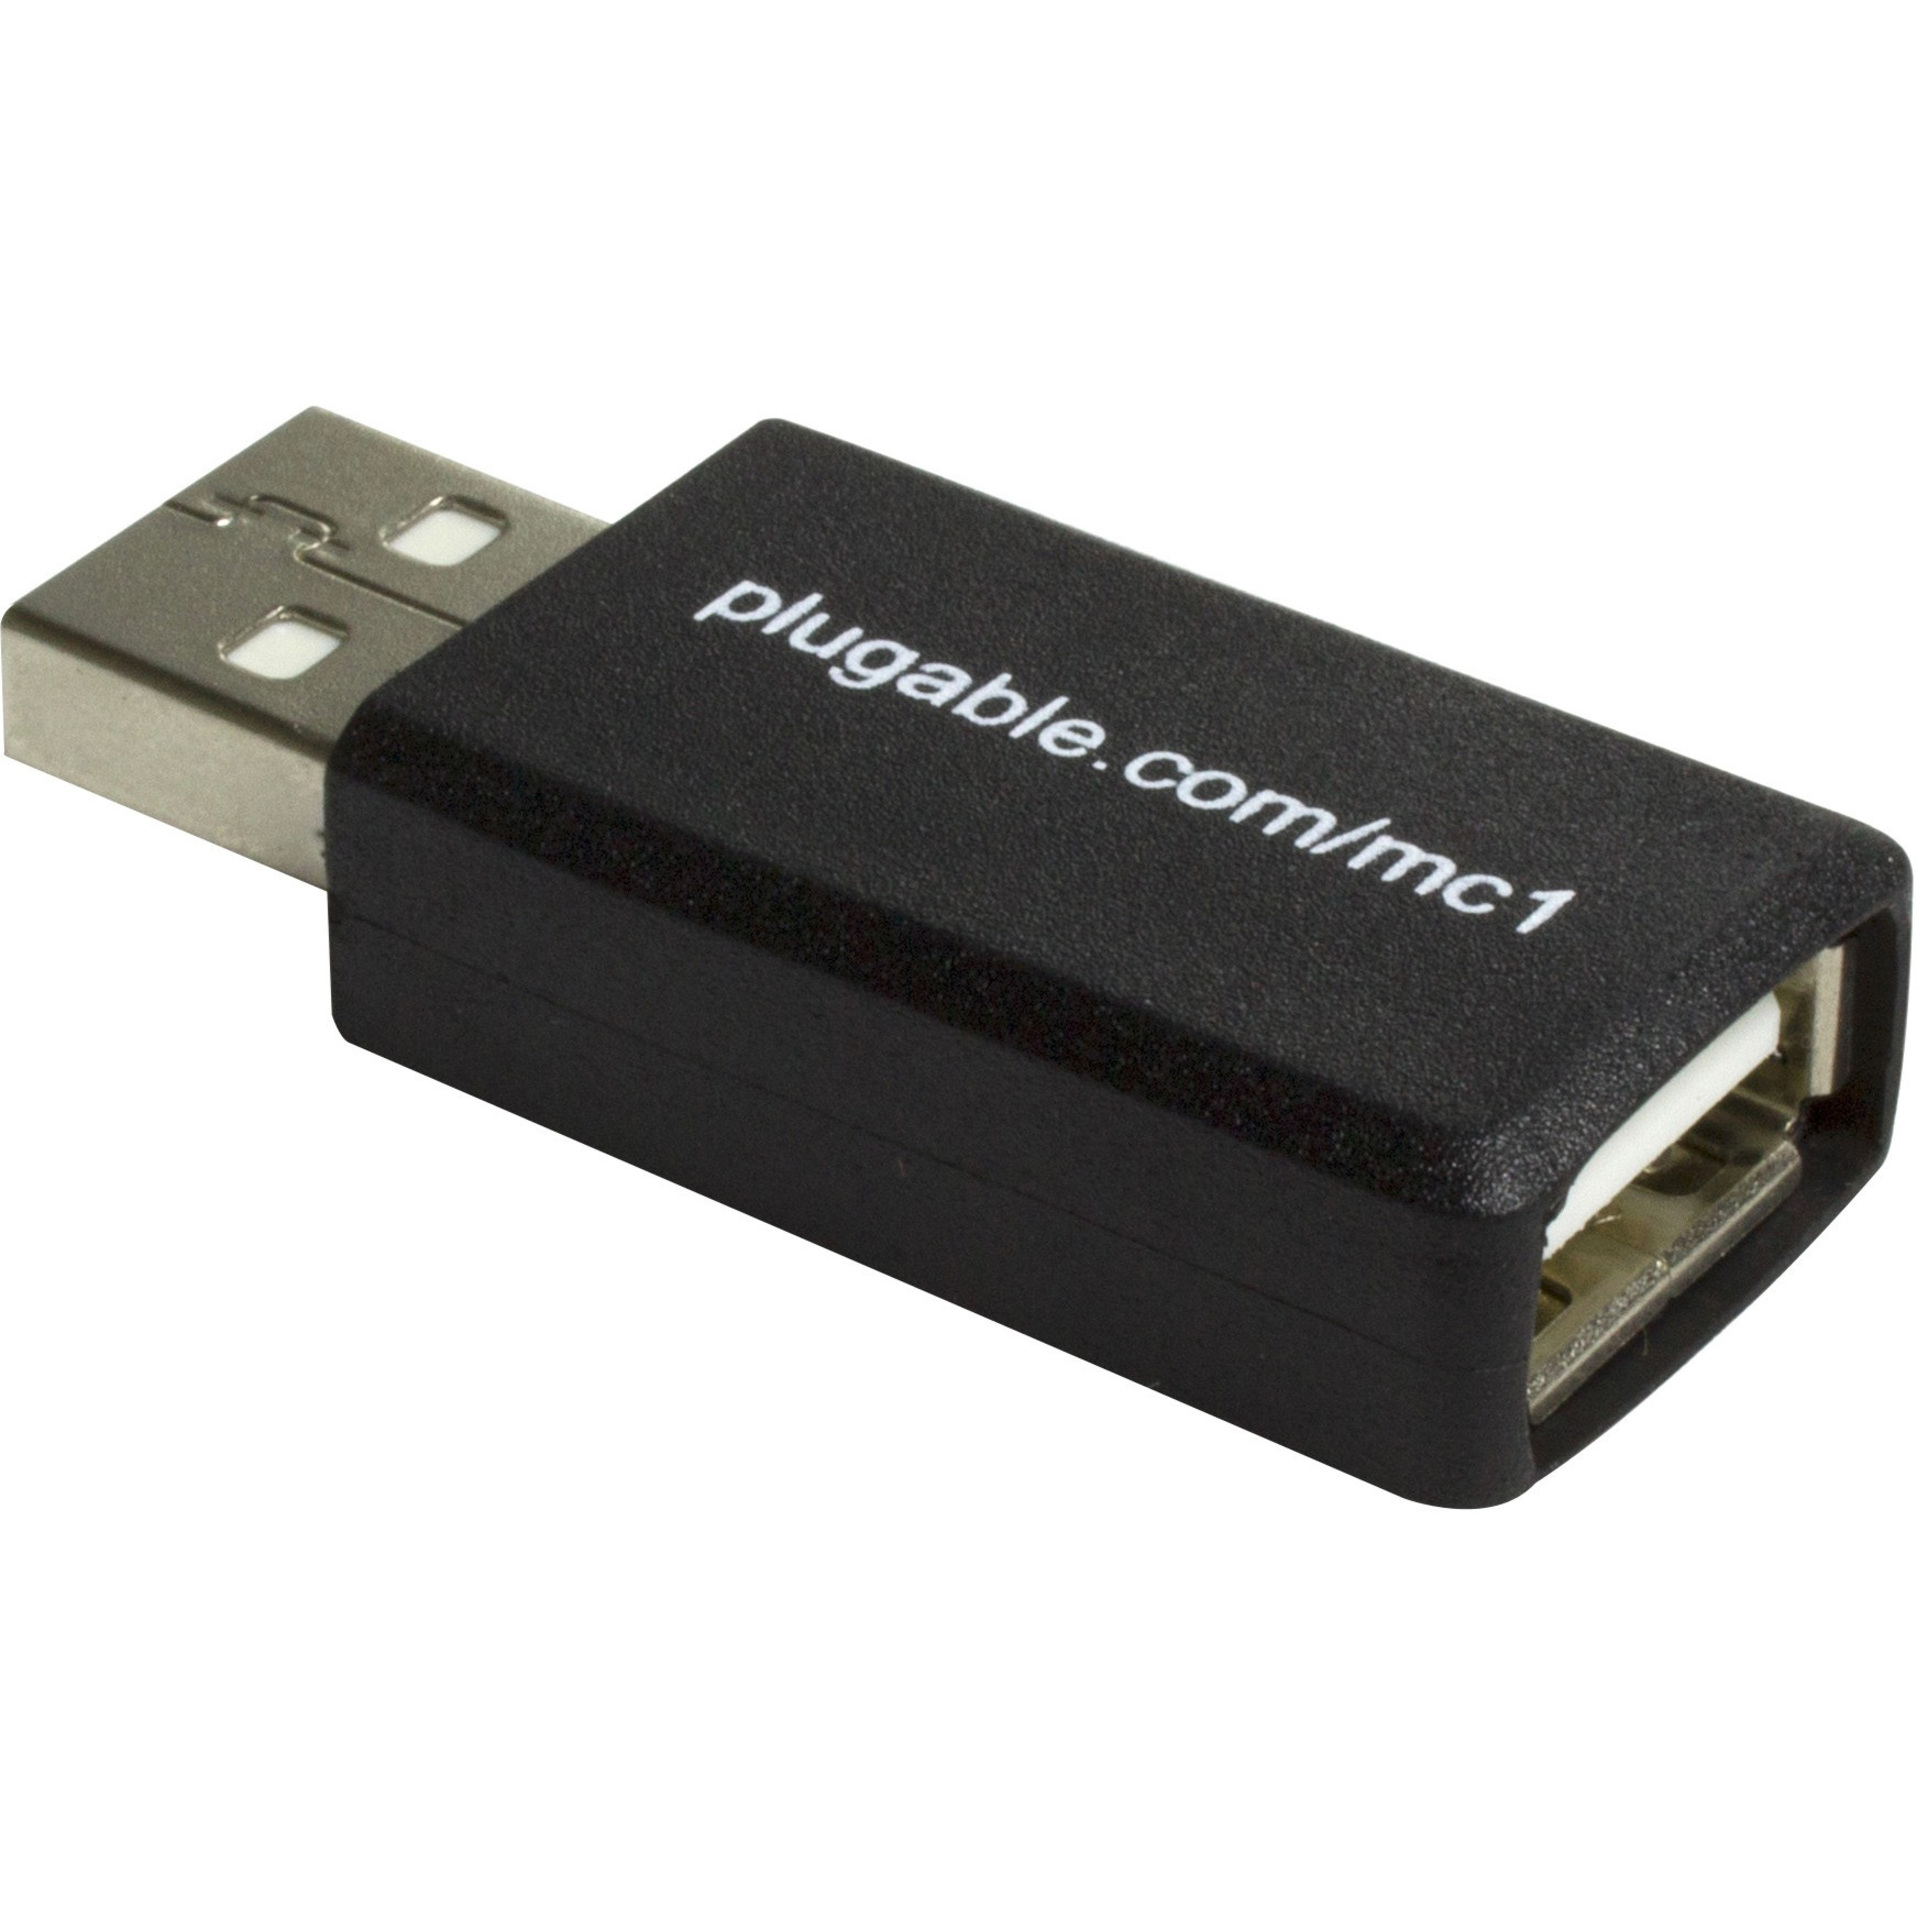 Plugable USB Universal Fast 1A Charge-Only Adapter for Android, Apple iOS, and Windows Mobile Devices - image 3 of 5